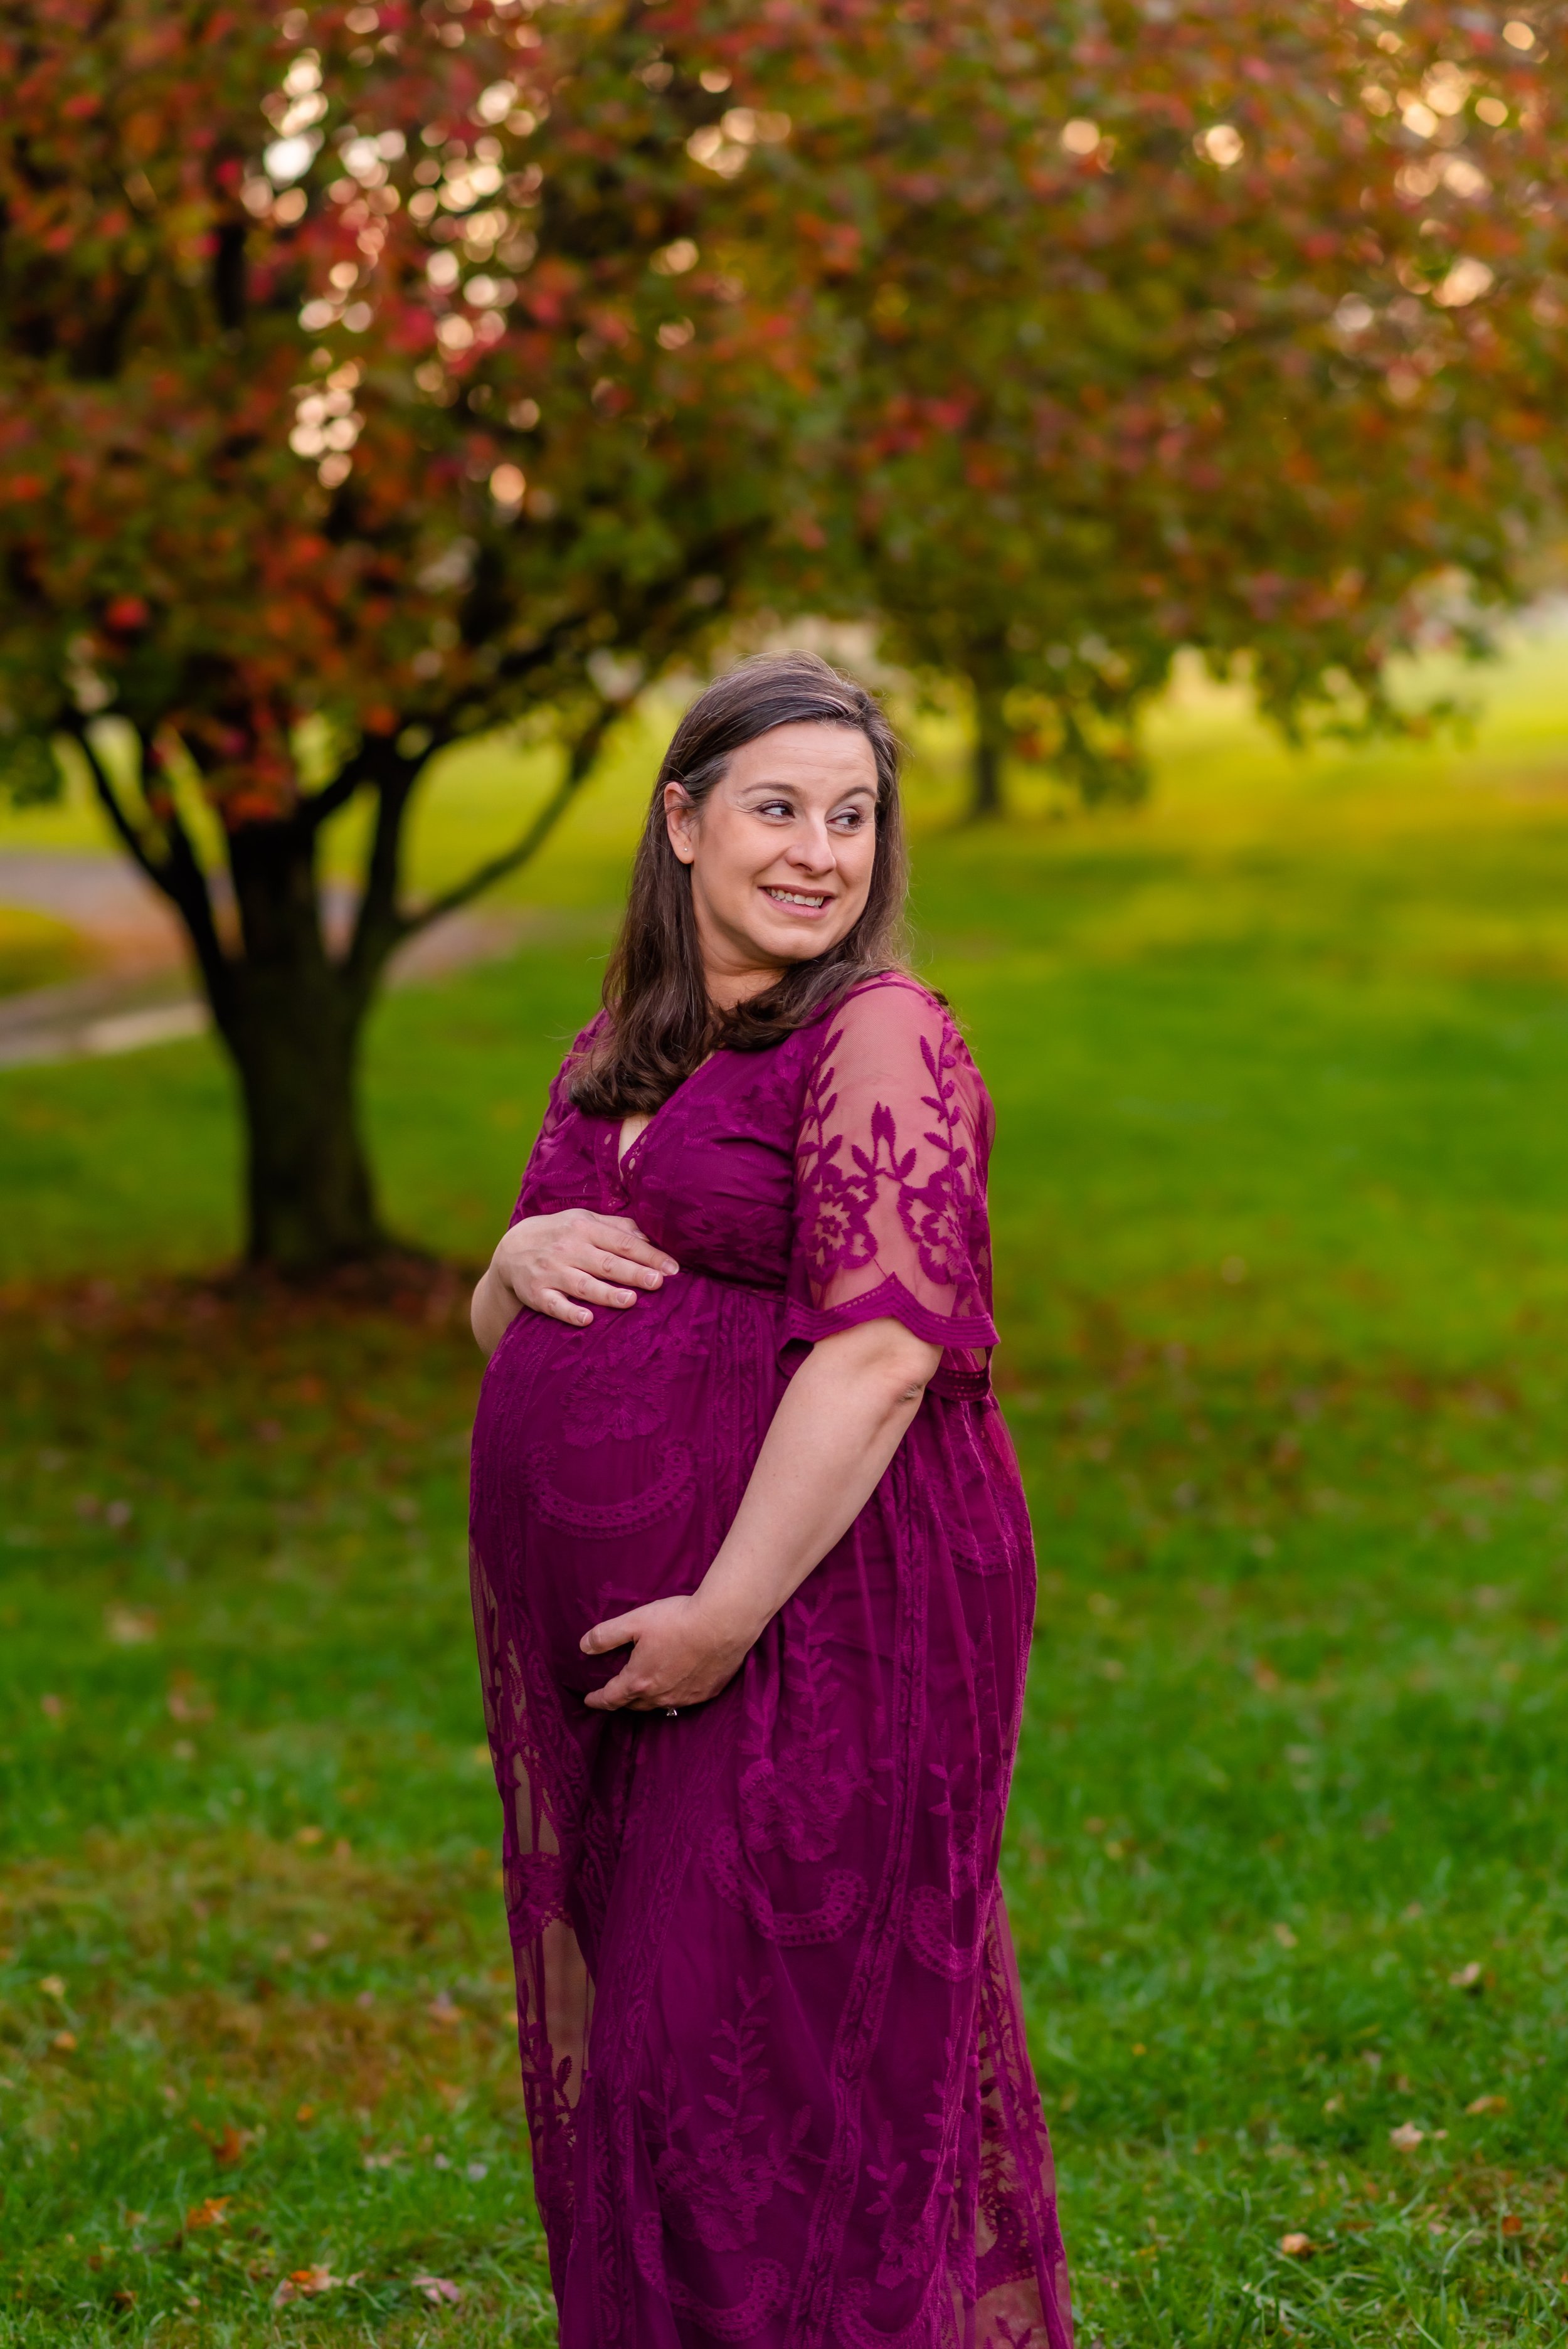 Maryland Maternity Photos - Pregnant woman looking over her shoulder and smiling